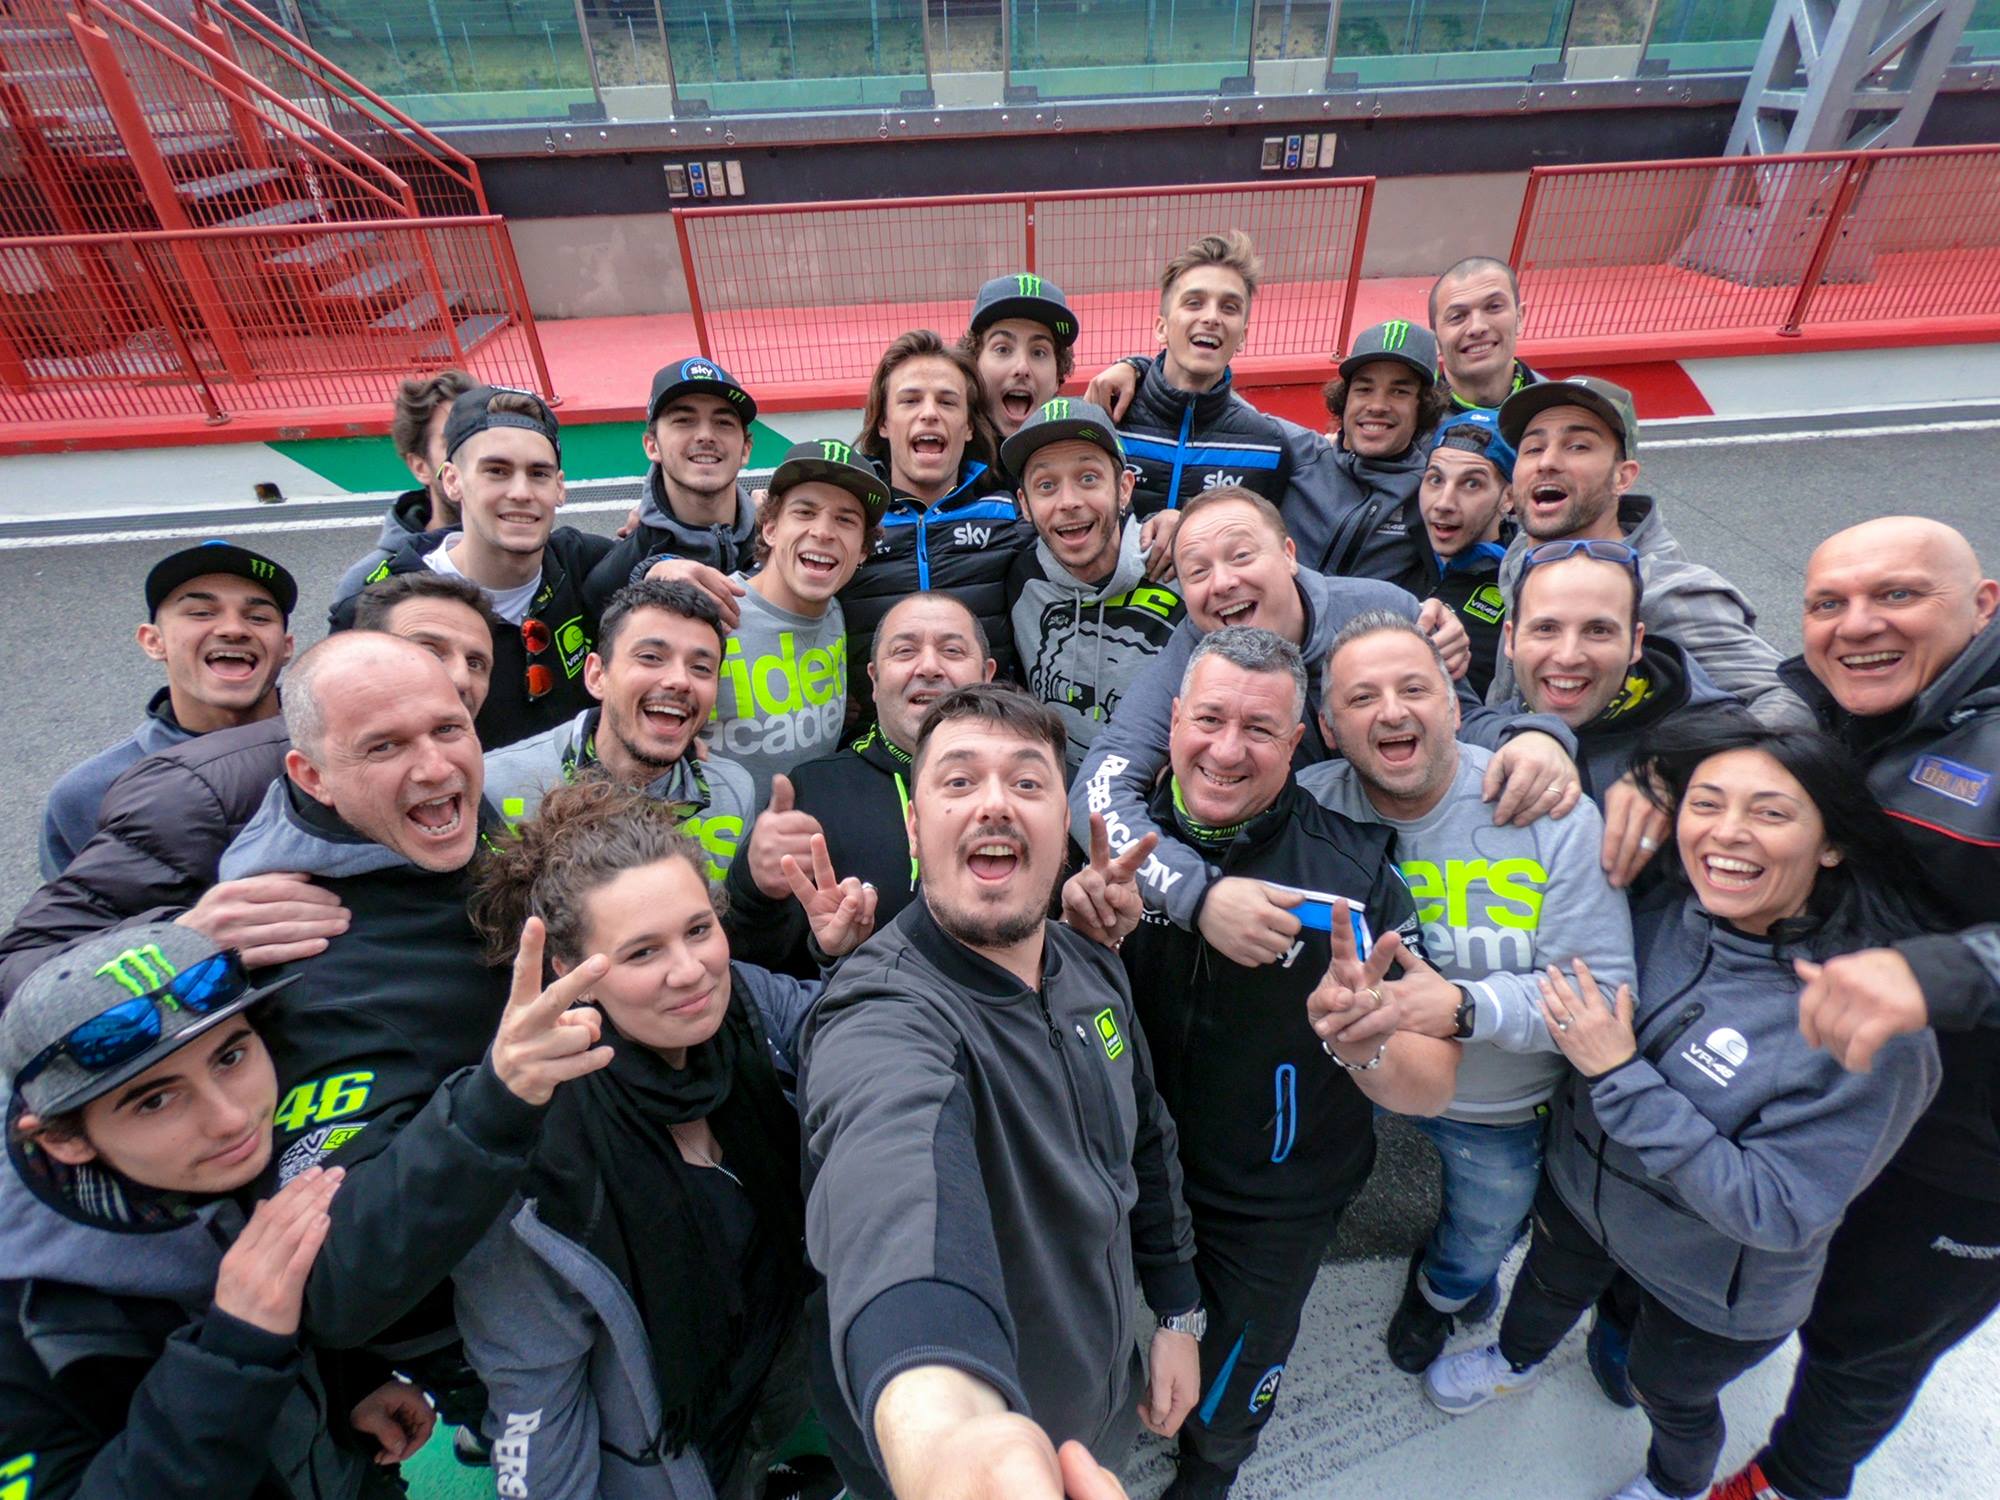 Valentino Rossi at the VR46 Riders Academy, taking a selfie with the team and the participants